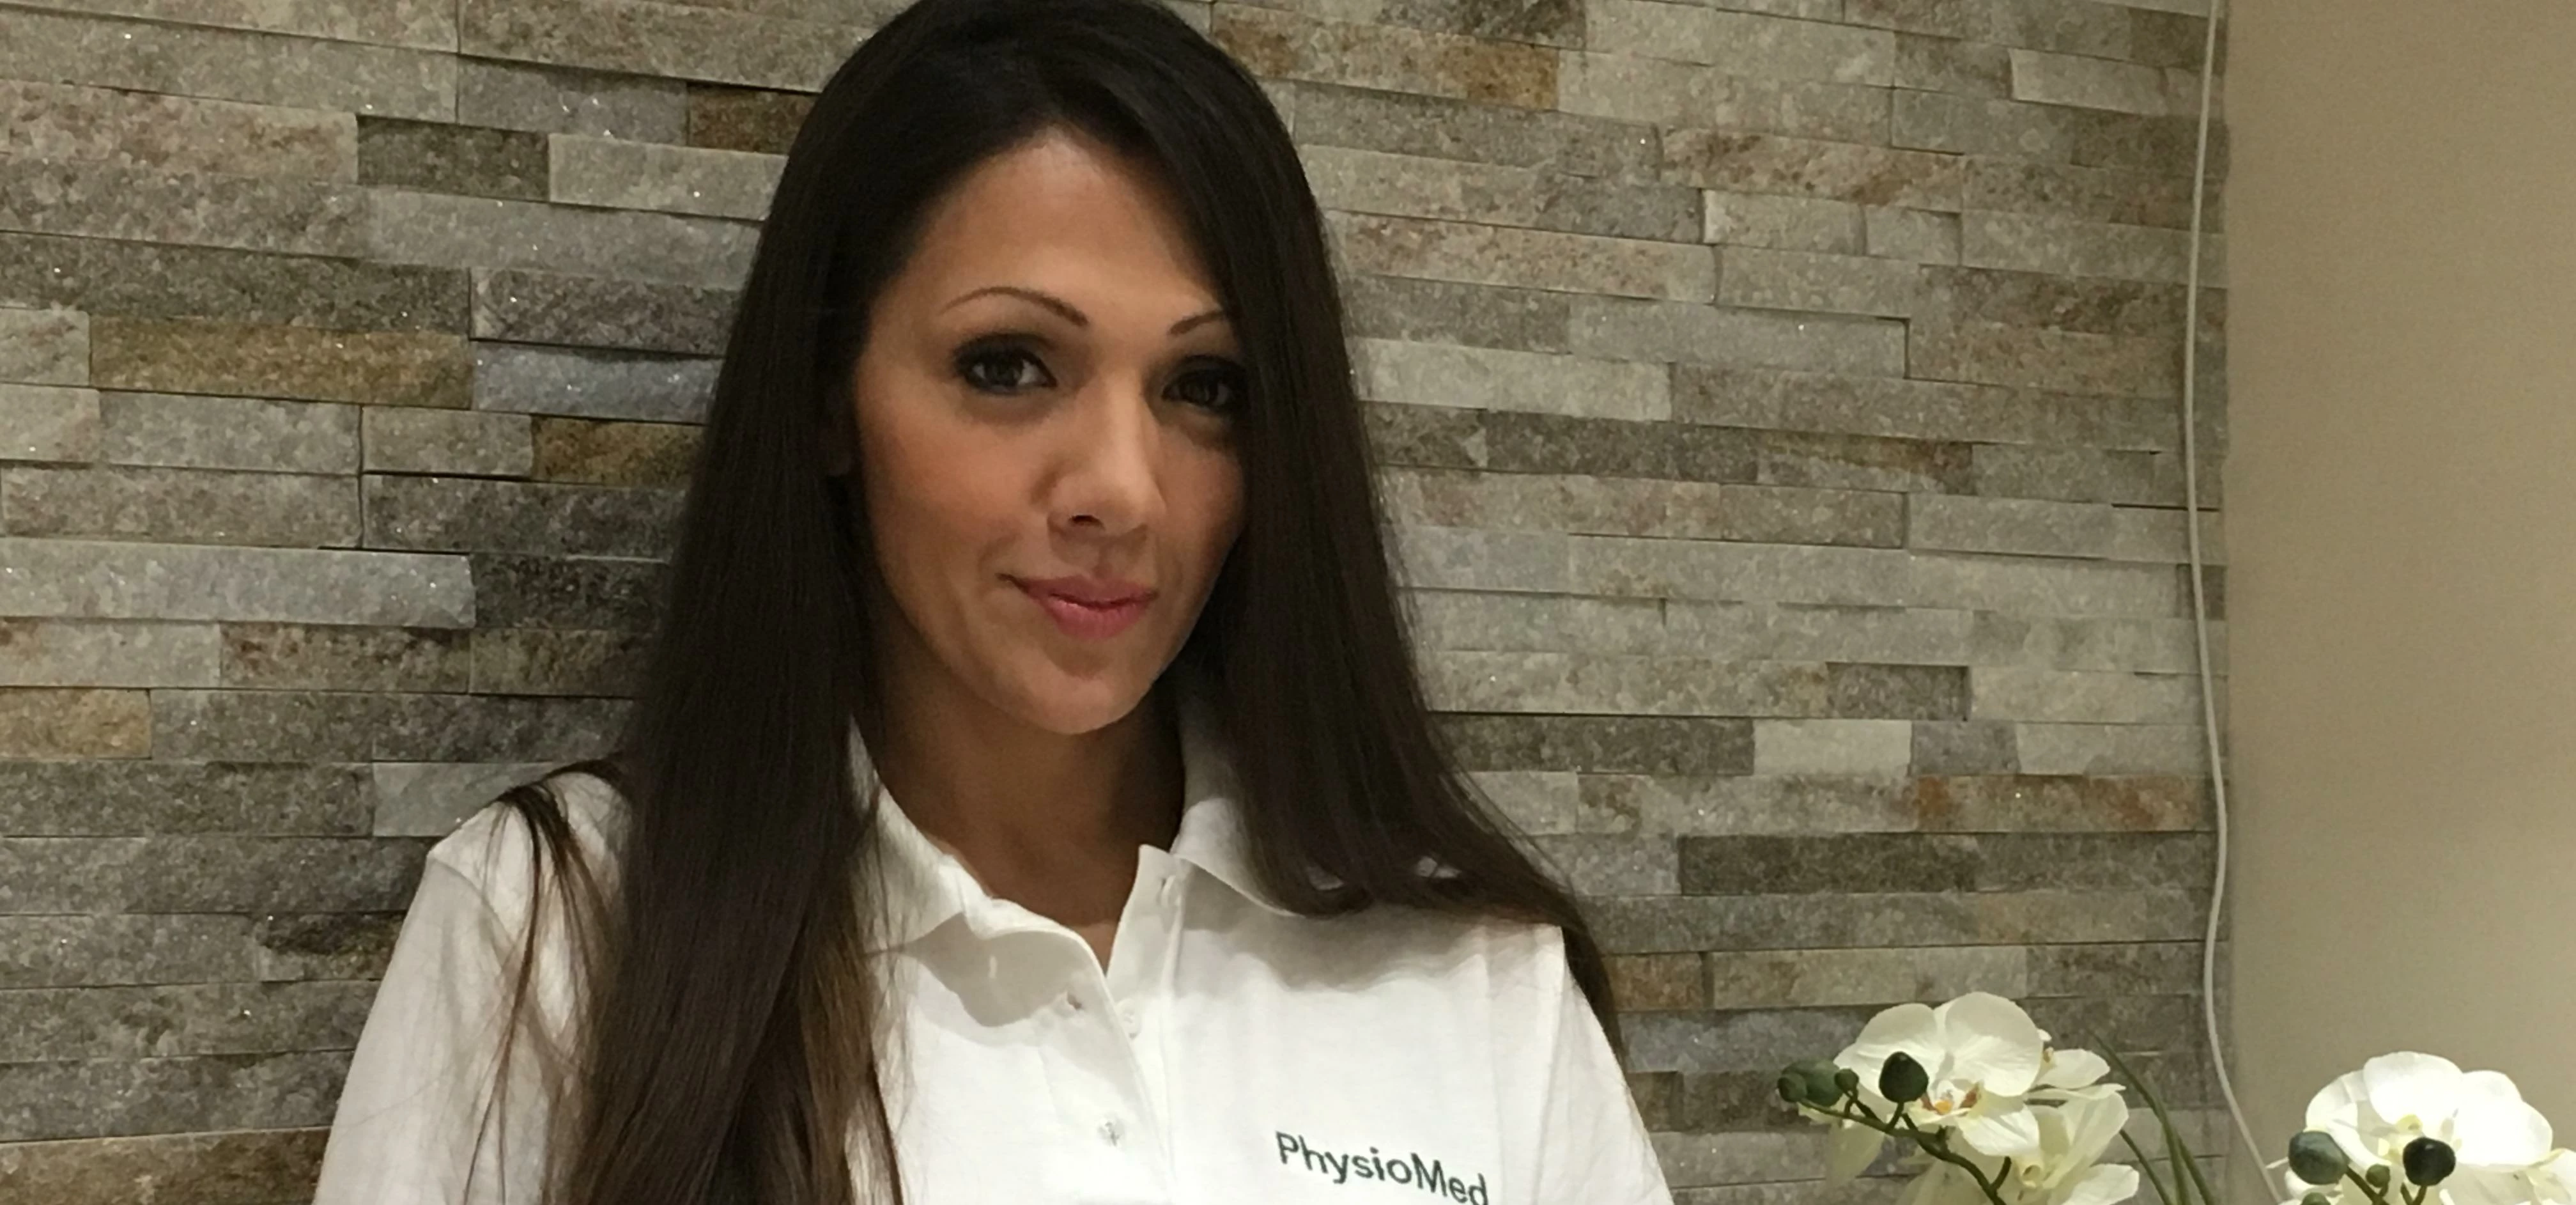 Physio Med's New Holistic Therapist, Farrah Deen